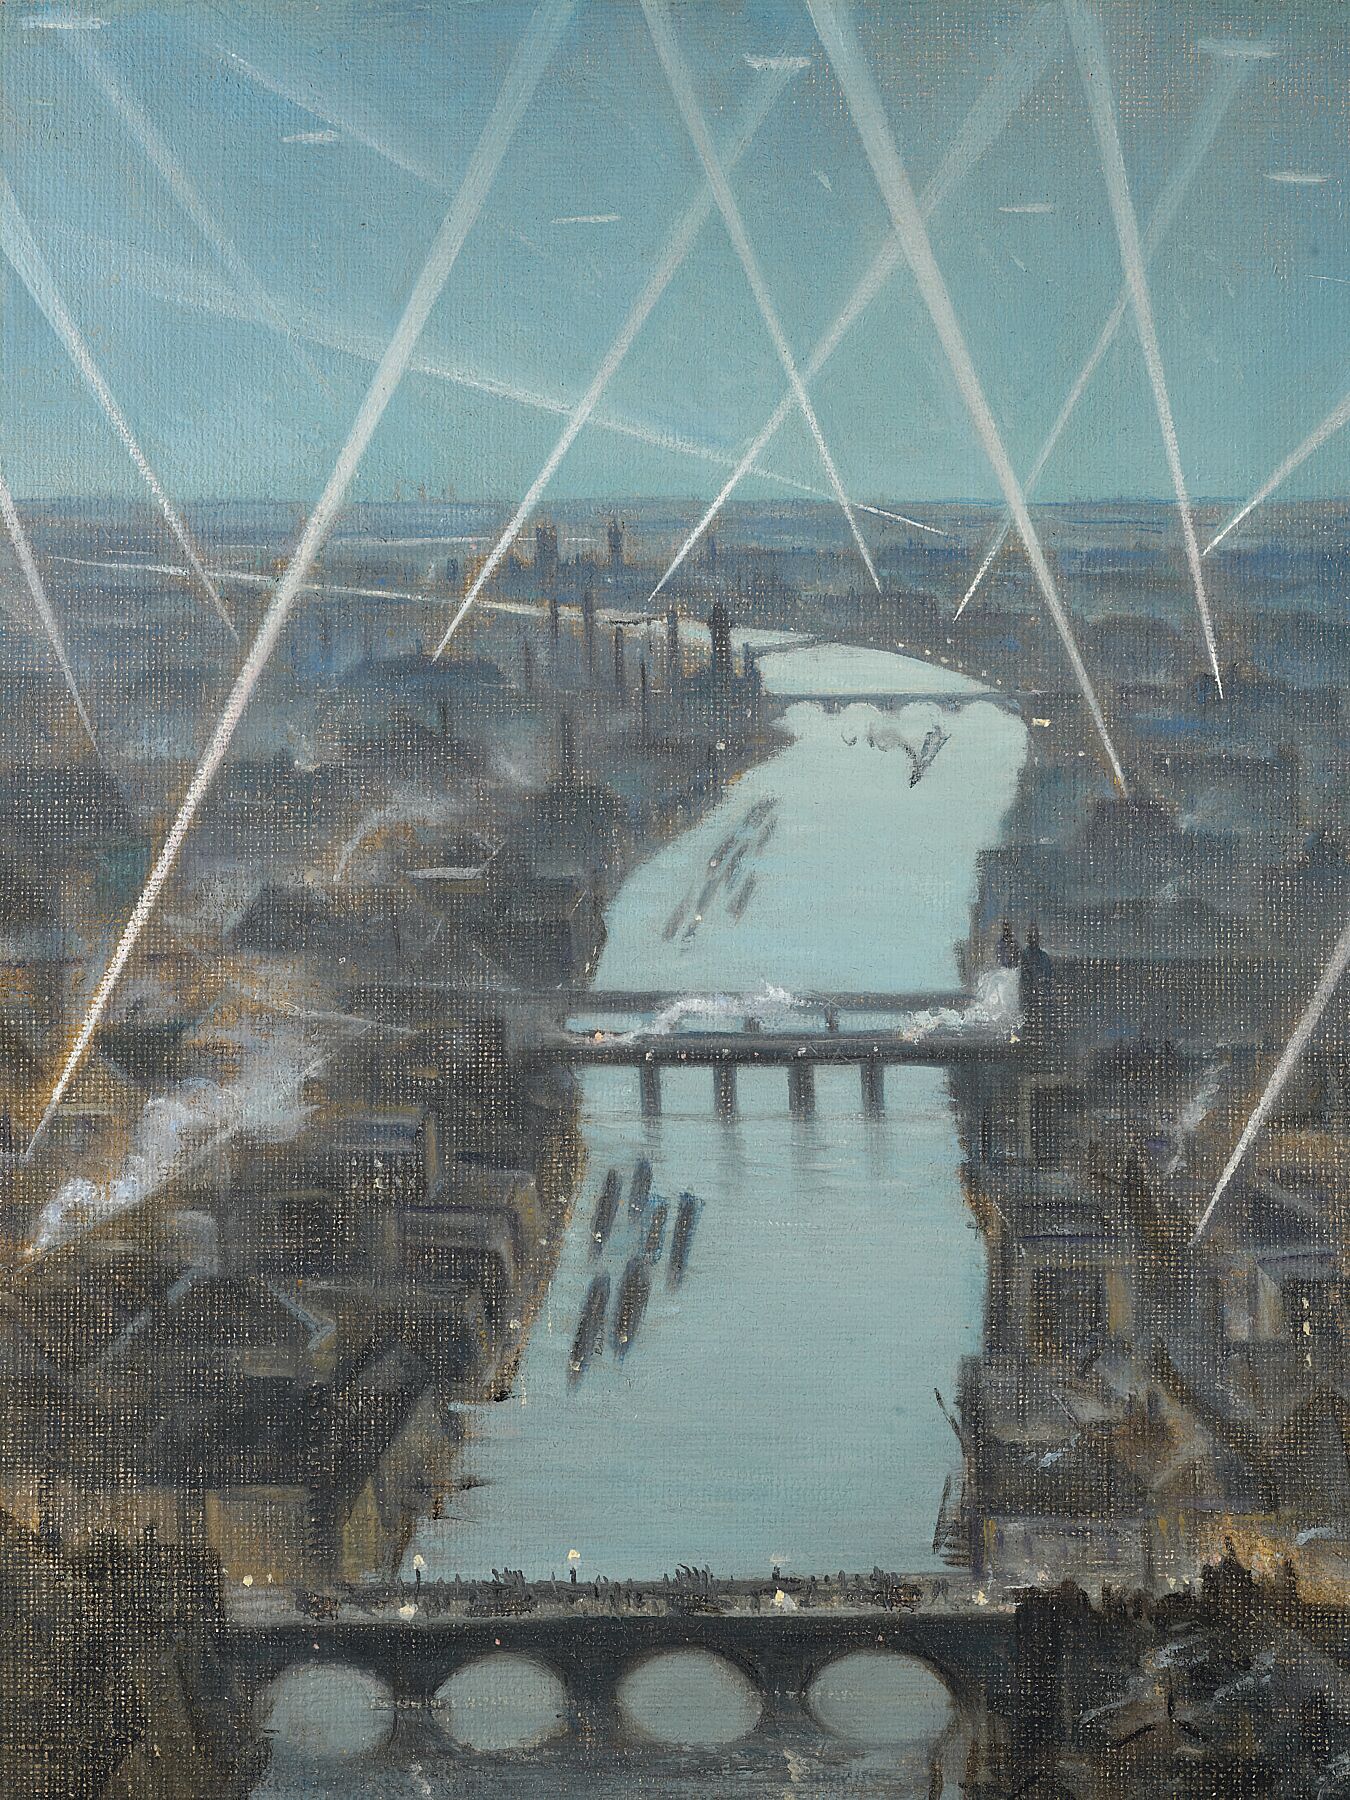 Christopher Richard Wynne Nevinson, A.R.A. (1889-1946)  Among the London Searchlights